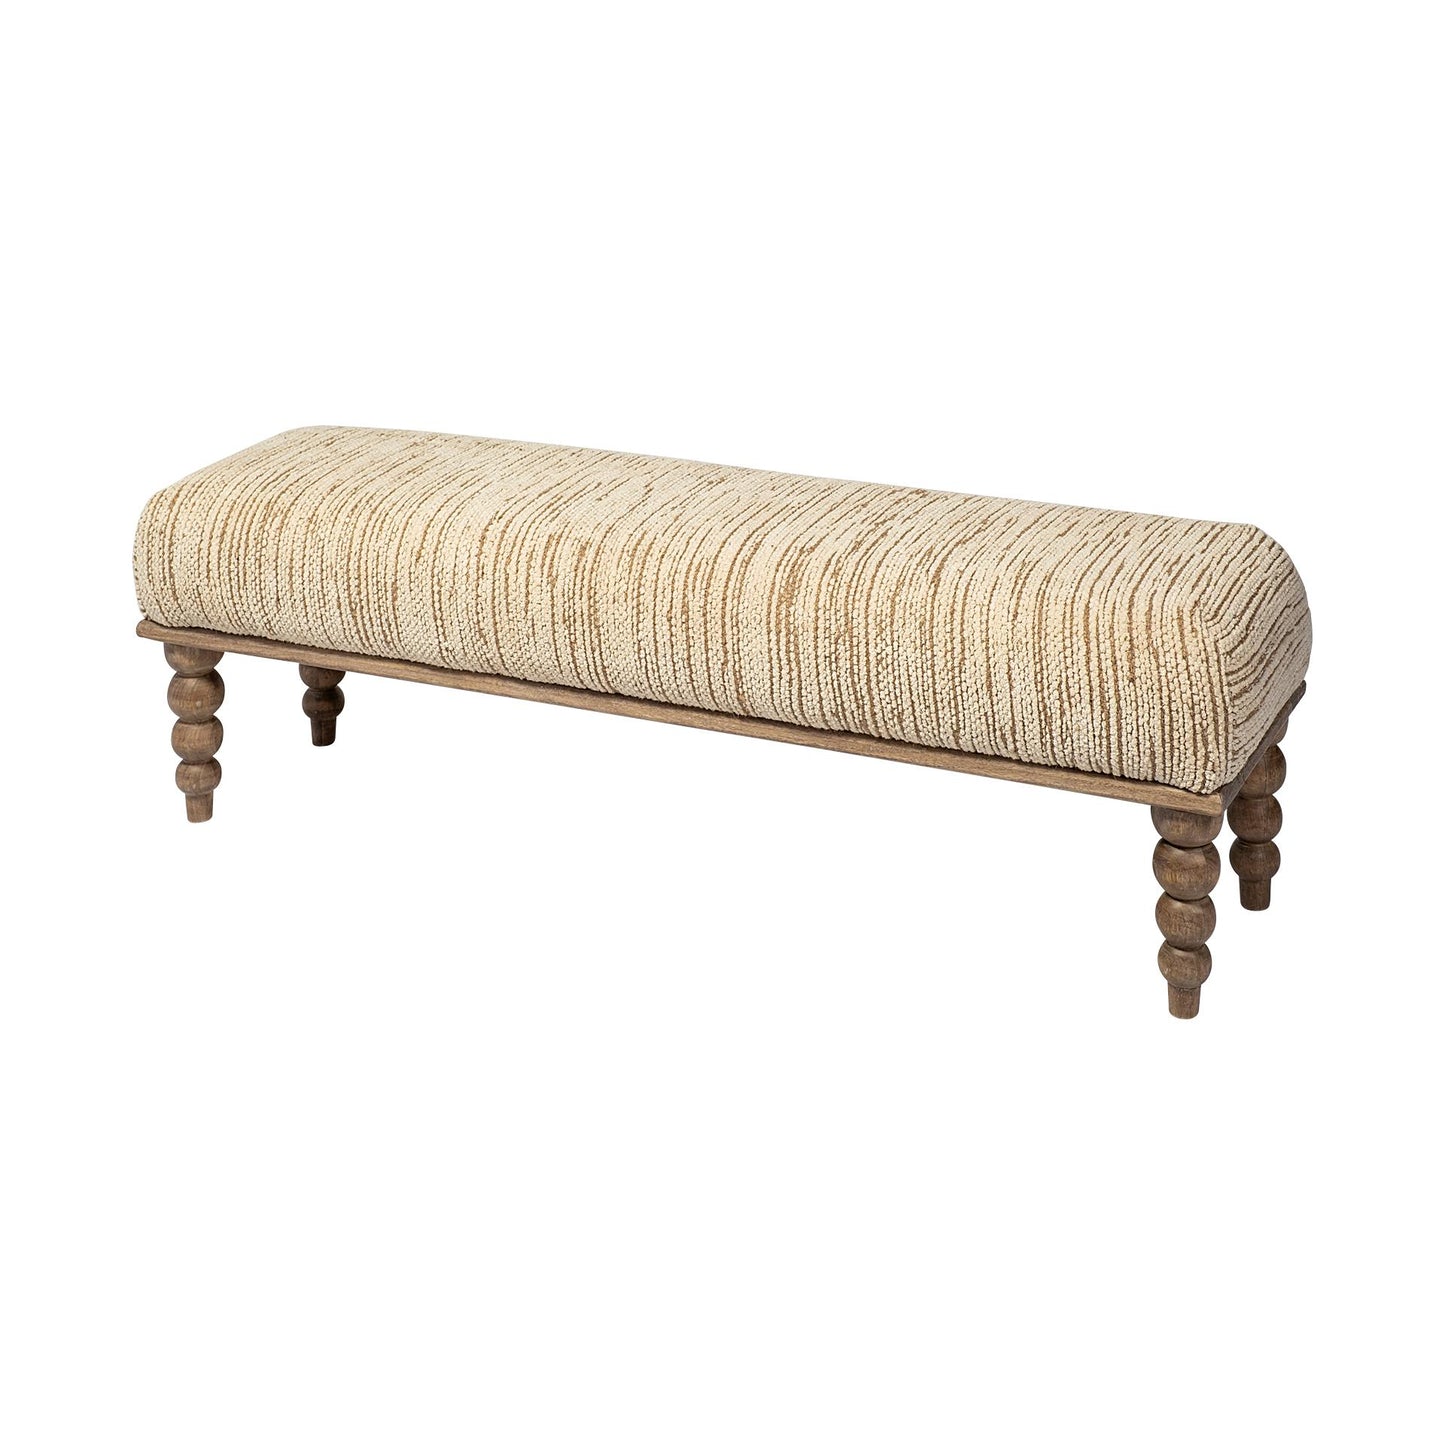 Alder II 55L x 16W Cream Upholstered Seat Wooden Base Accent Bench